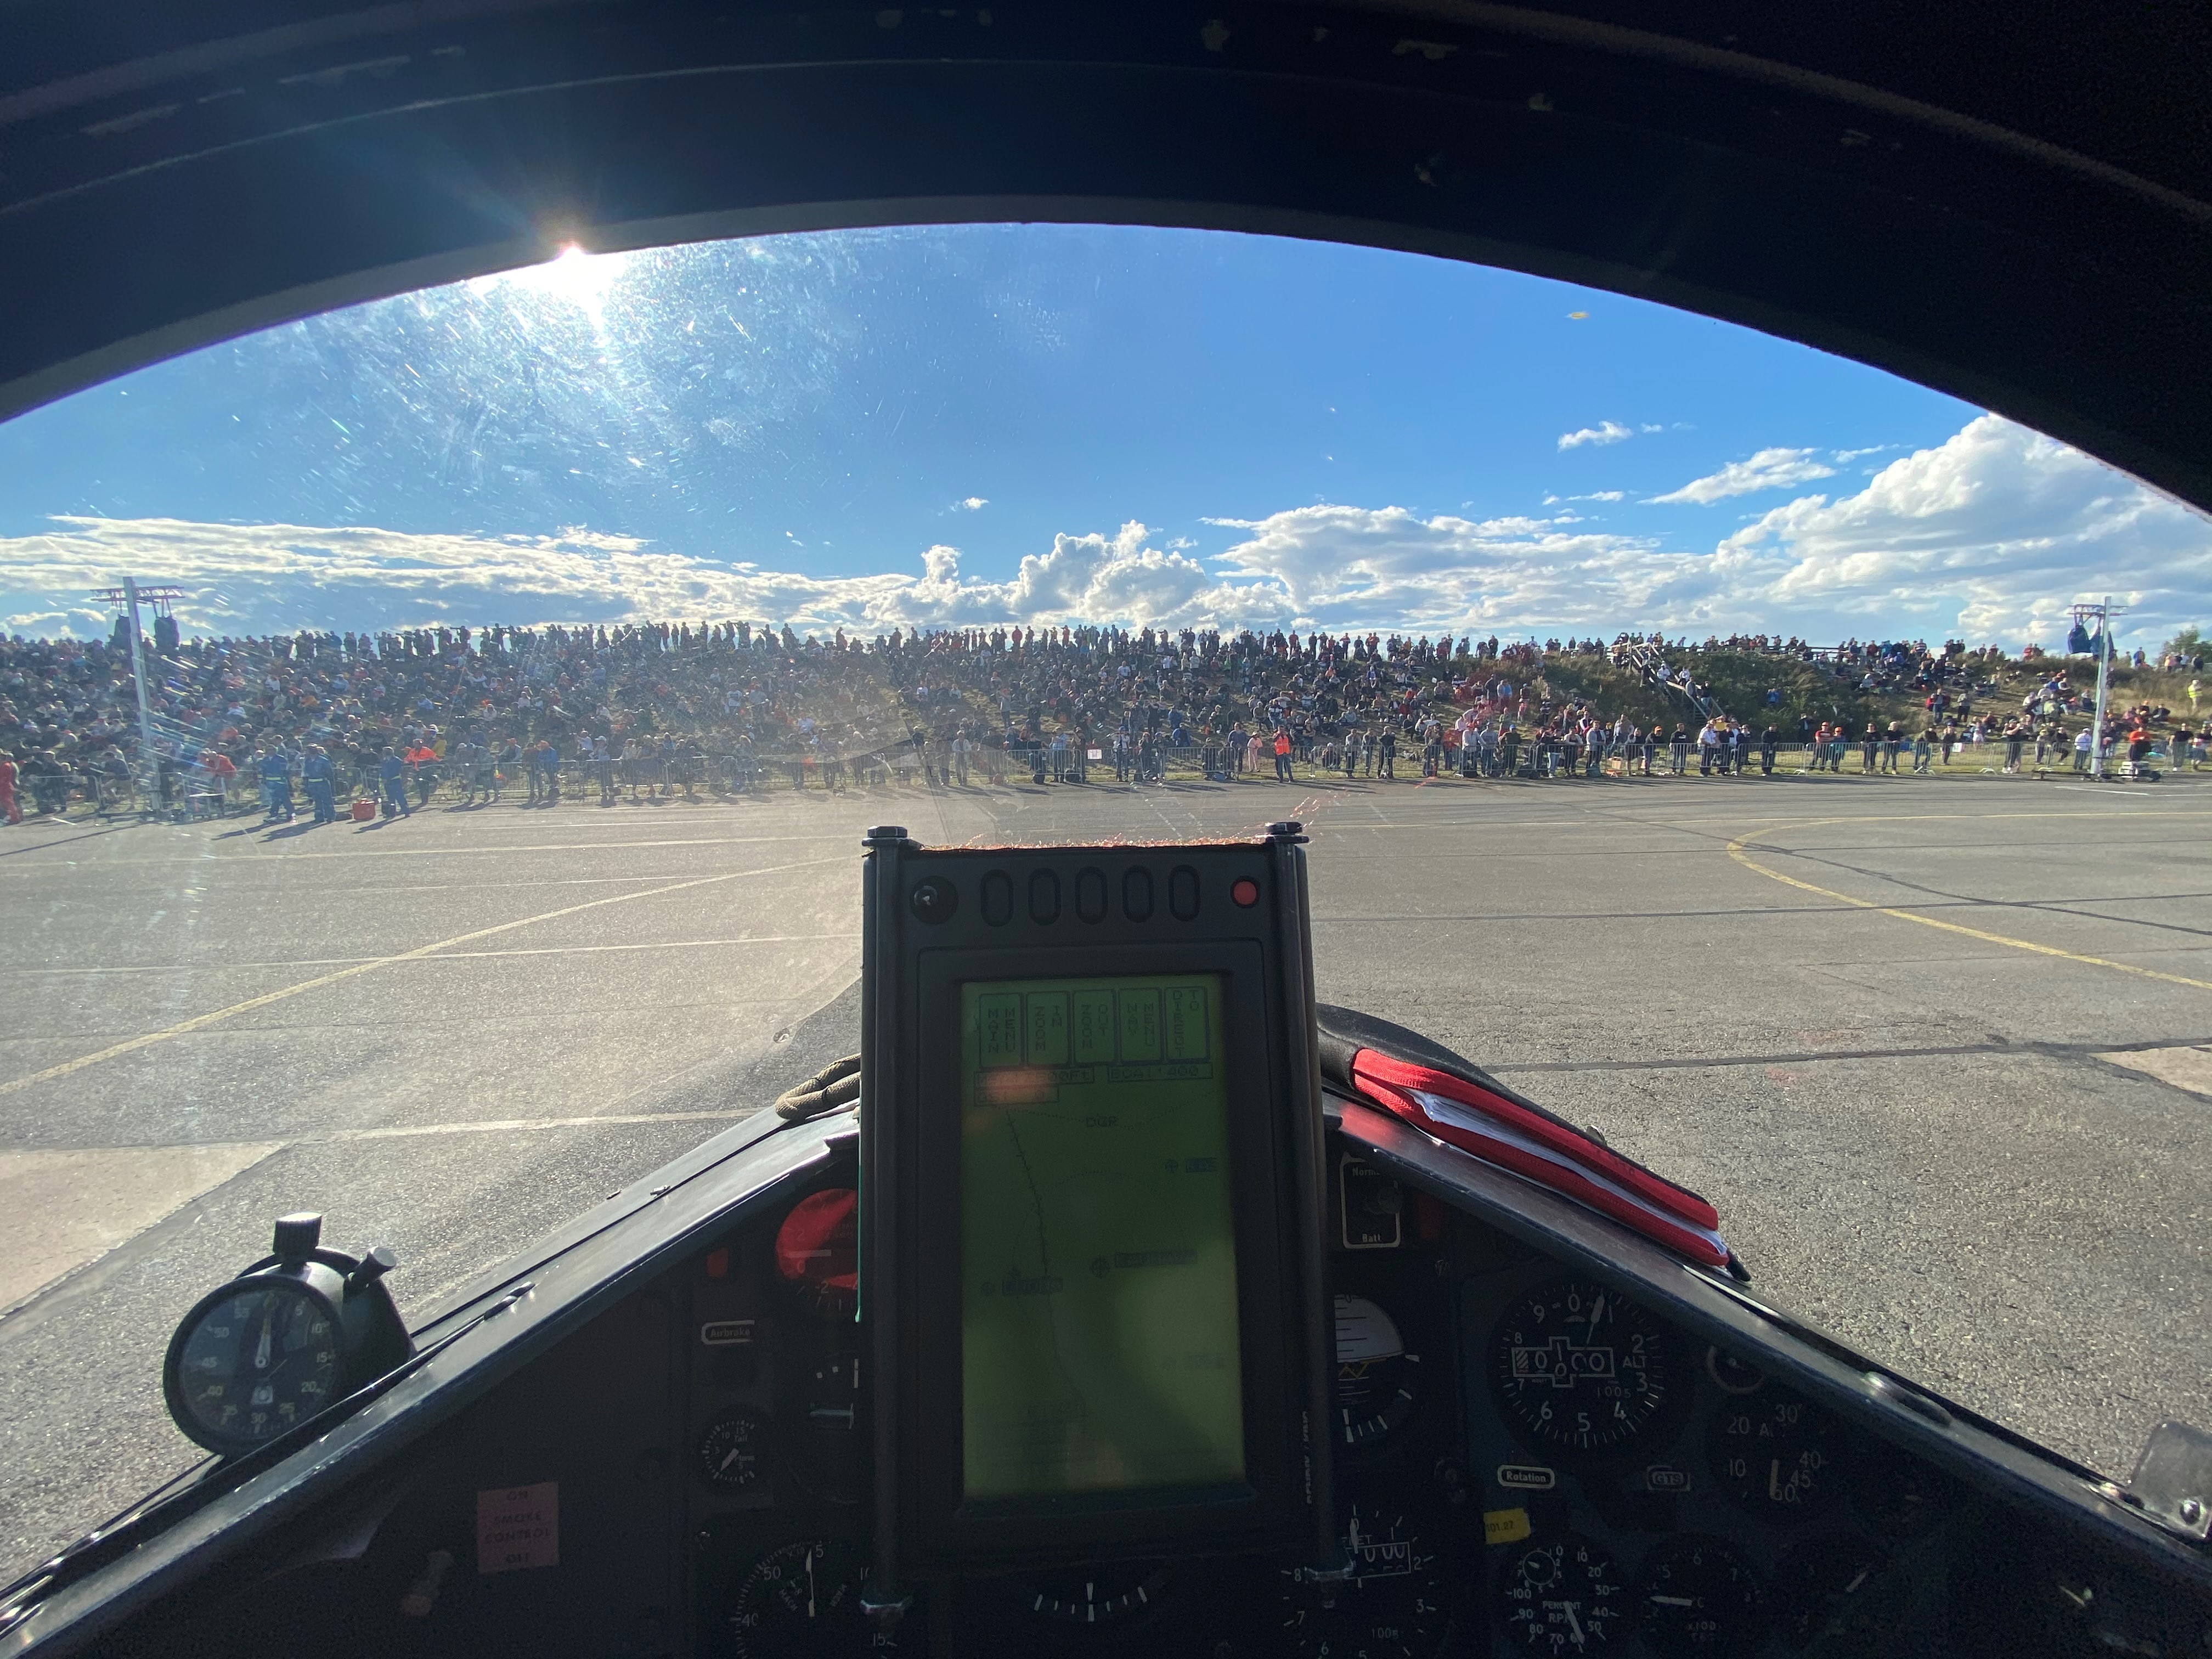 The view of the huge crowd from Squadron Leader Turner's jet in Finland in 2020.